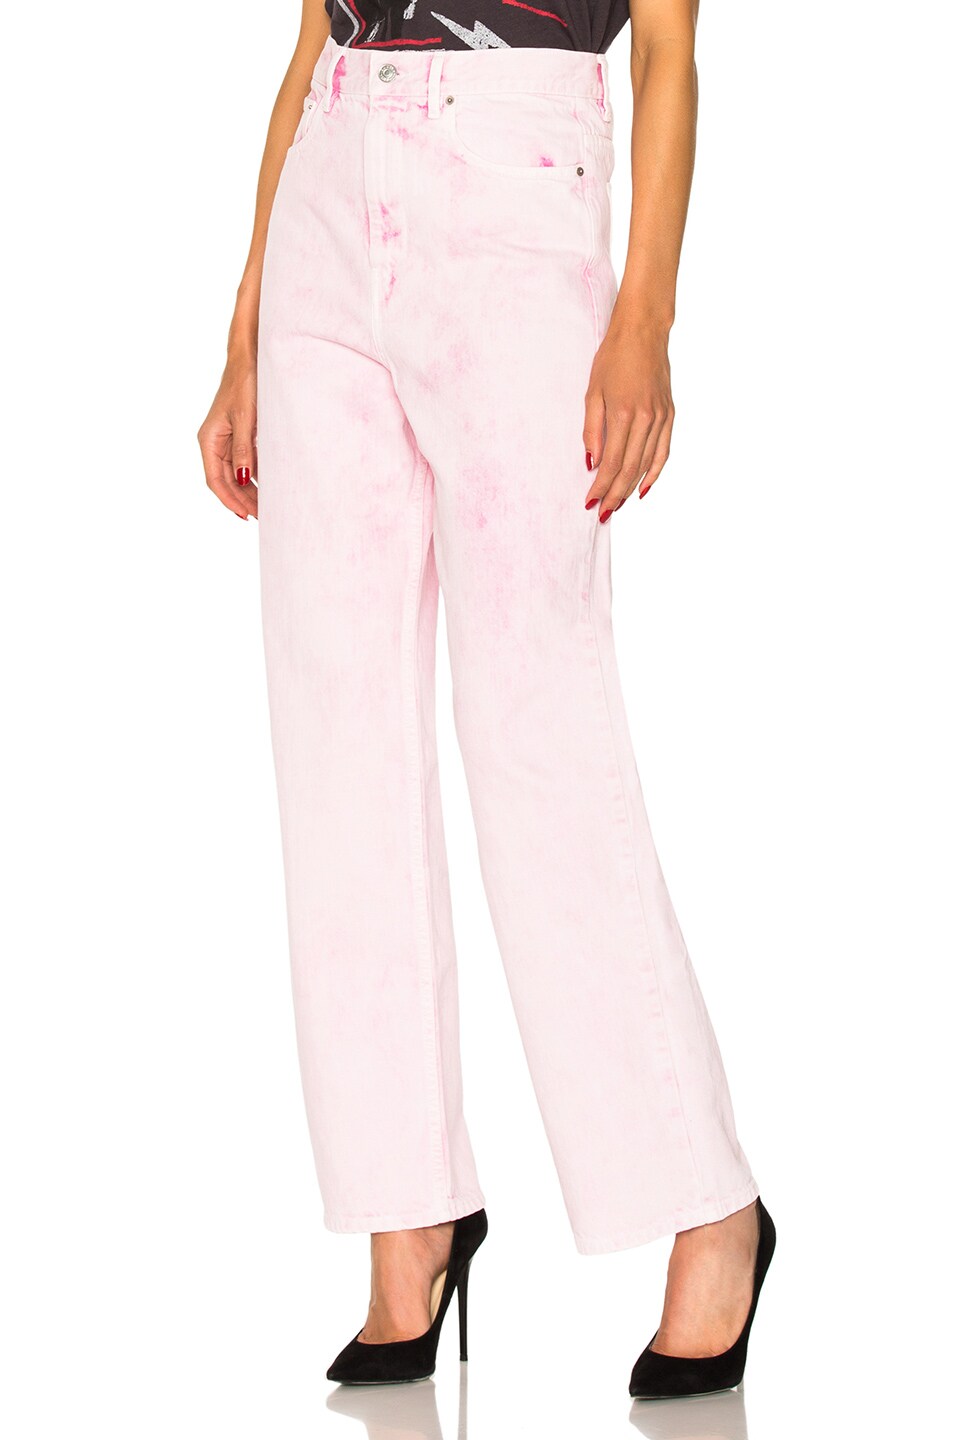 Isabel Marant Etoile Forby Colored Boyfriend Jeans in Light Pink | FWRD